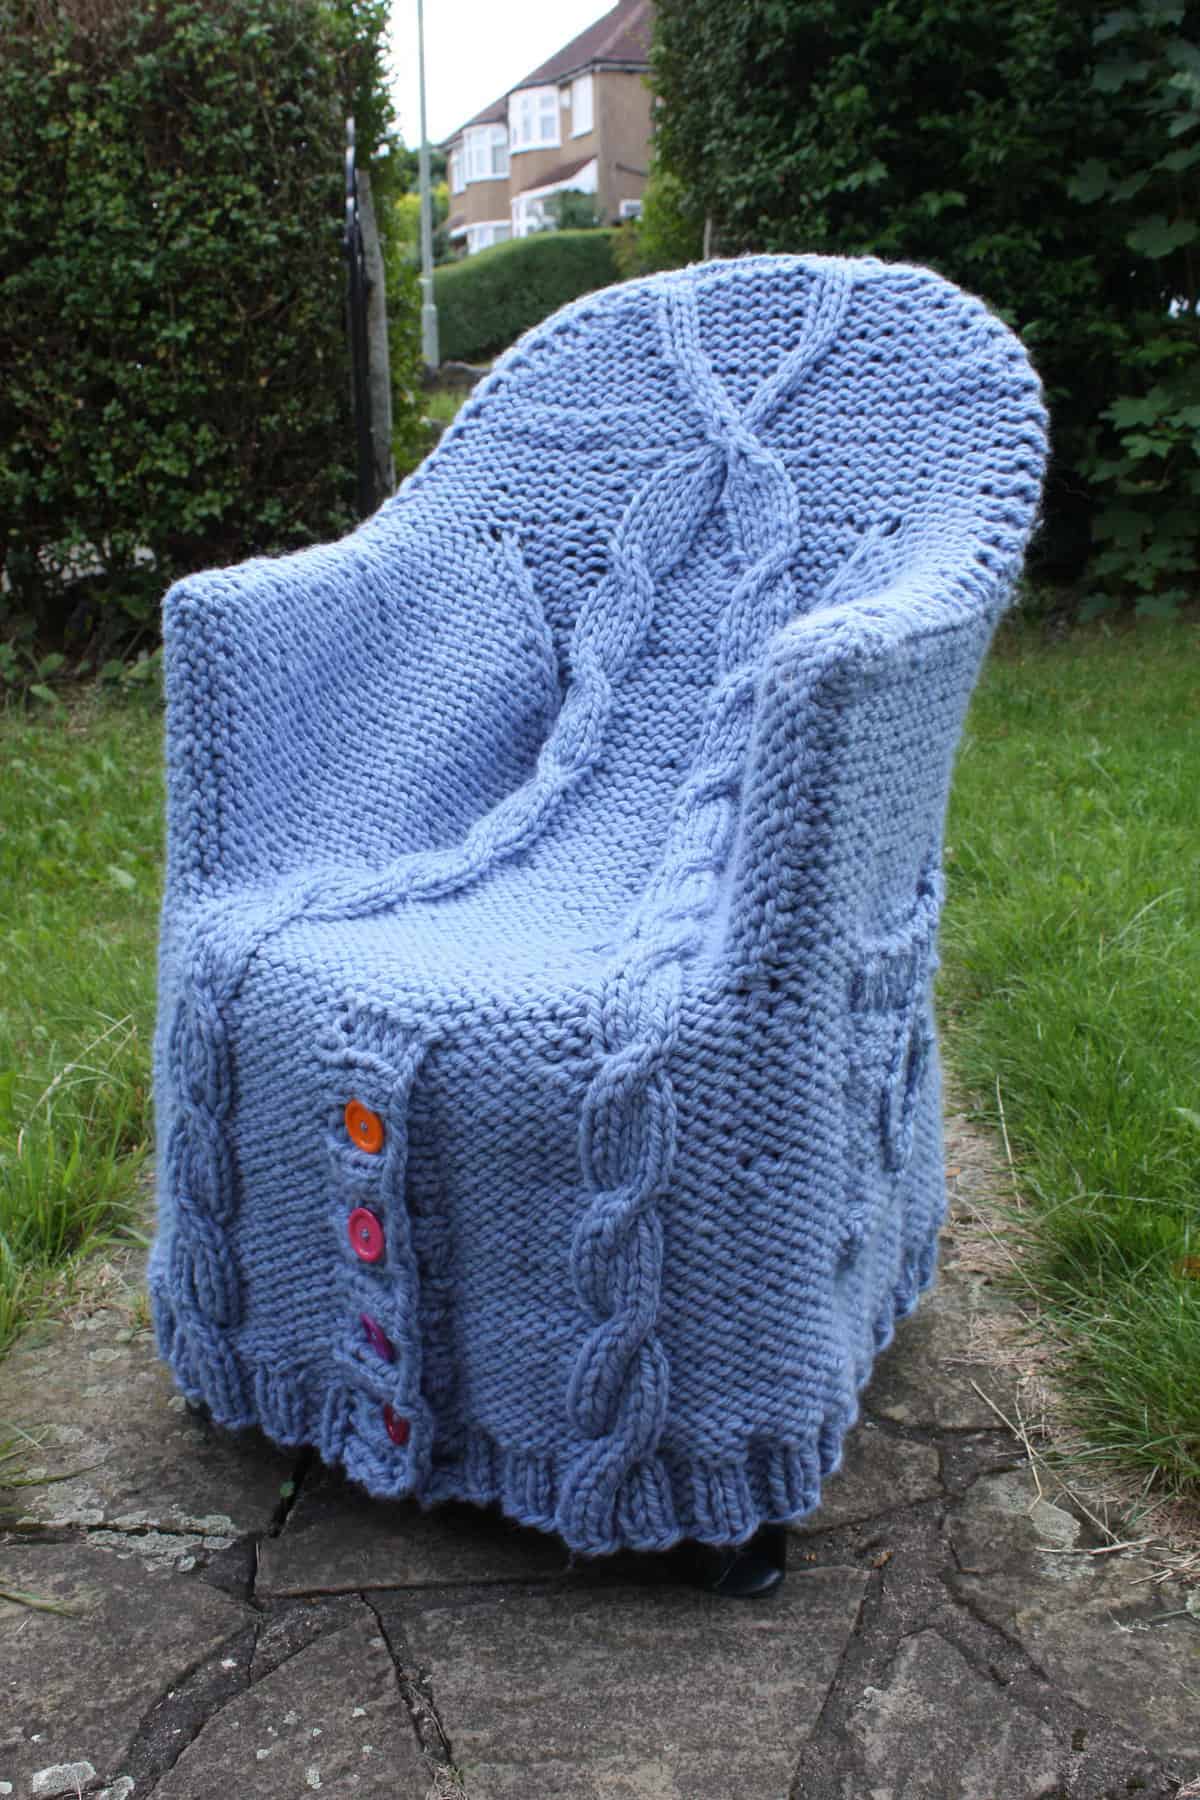 A knitted chair cover with cable patterns and buttons displayed outdoors.